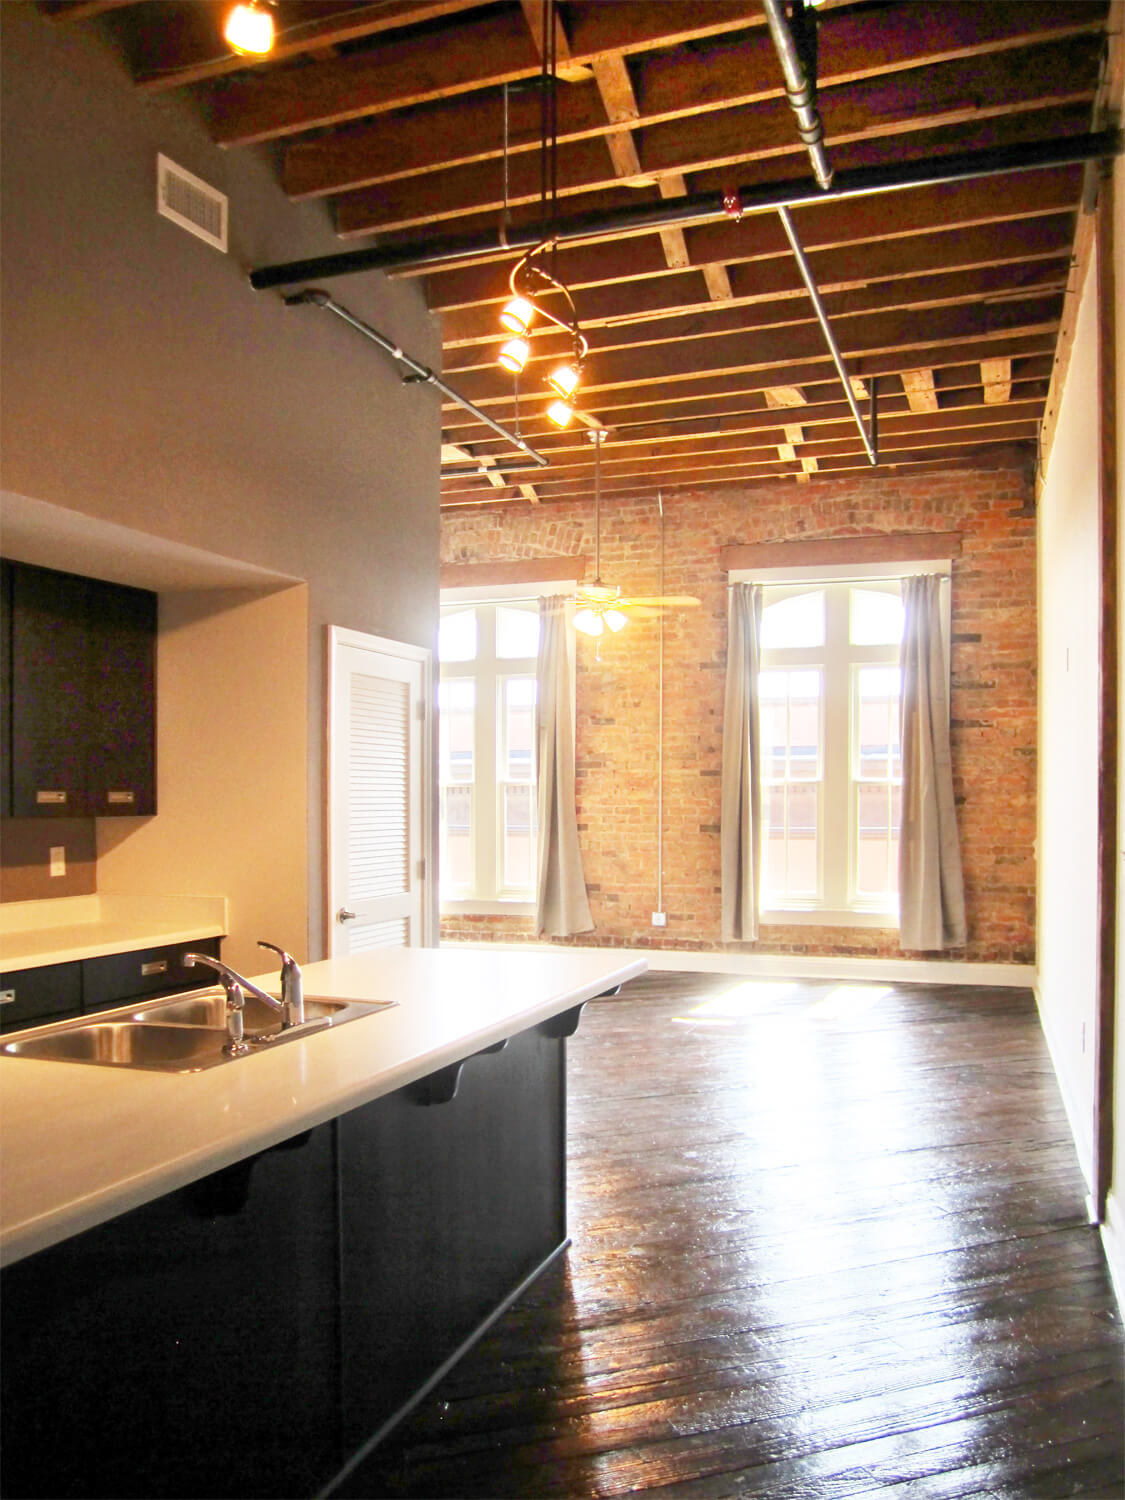 Printing Press Lofts Designed by Foshee Architecture - Interior View of Apartment with an Exposed Wood Ceiling